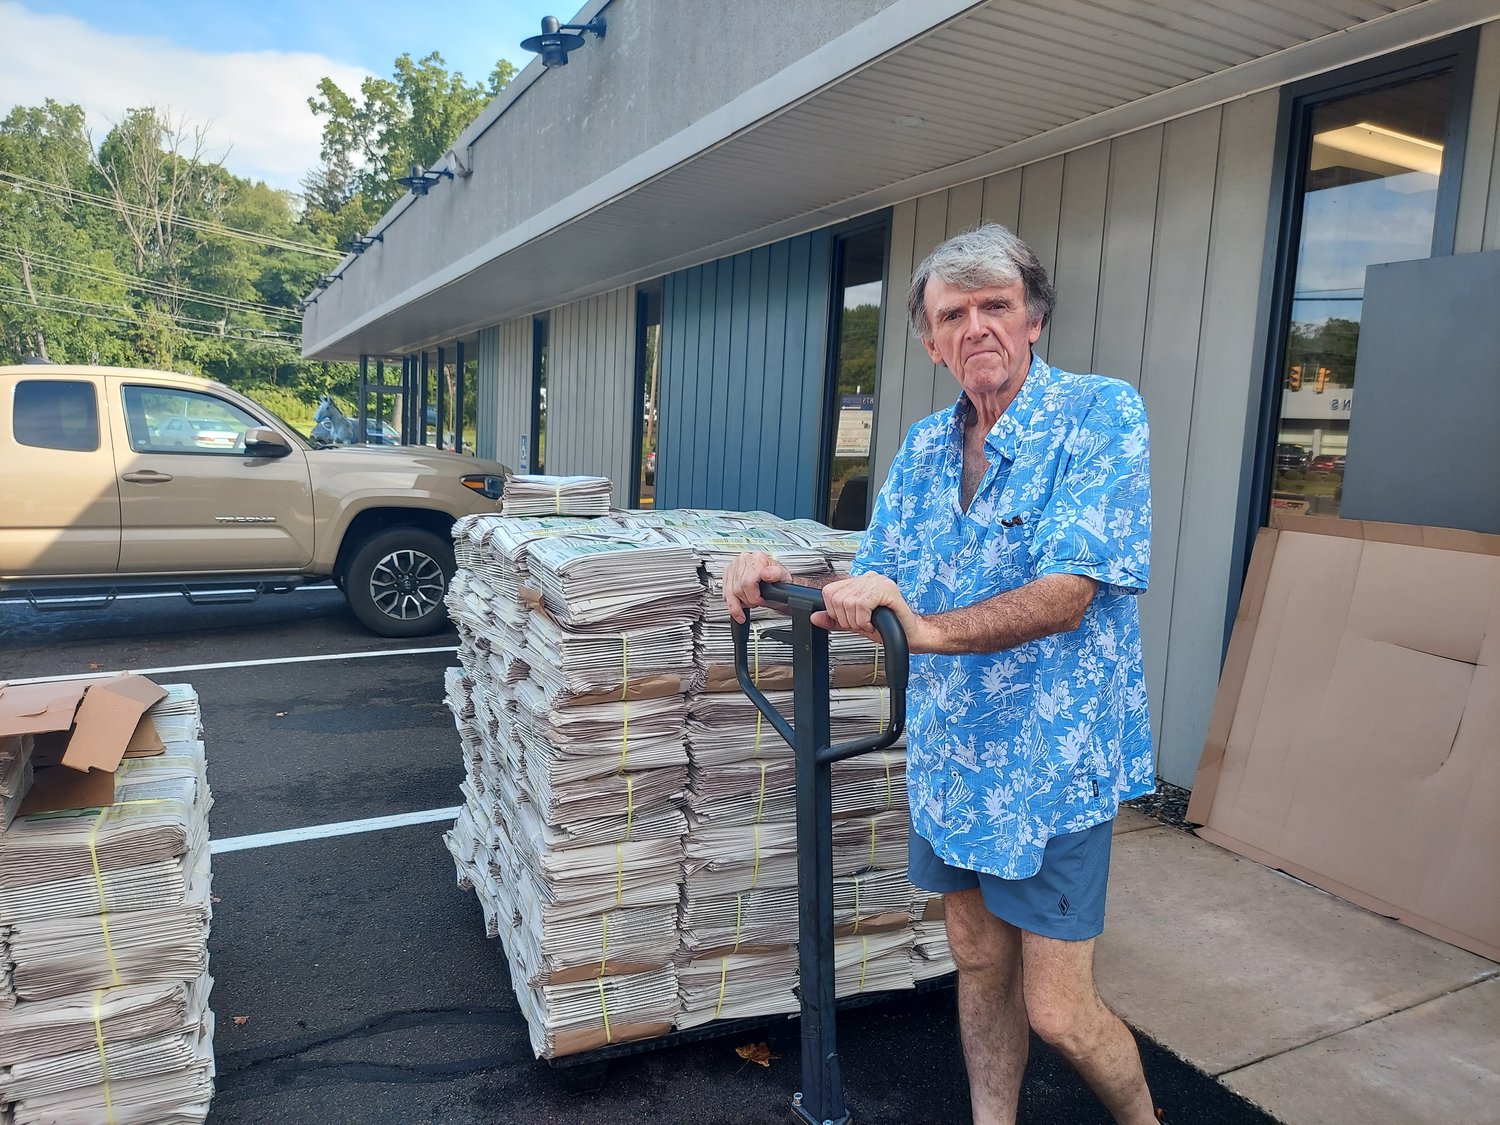 John Albert is always on the job on Thursday mornings. He is one of a half dozen drivers who deliver the Bucks County Herald to stores and other outlets each week. A Jamison resident, he has been named the Pennsylvania NewsMedia Association Foundations’s 2022 Carrier of the Year.